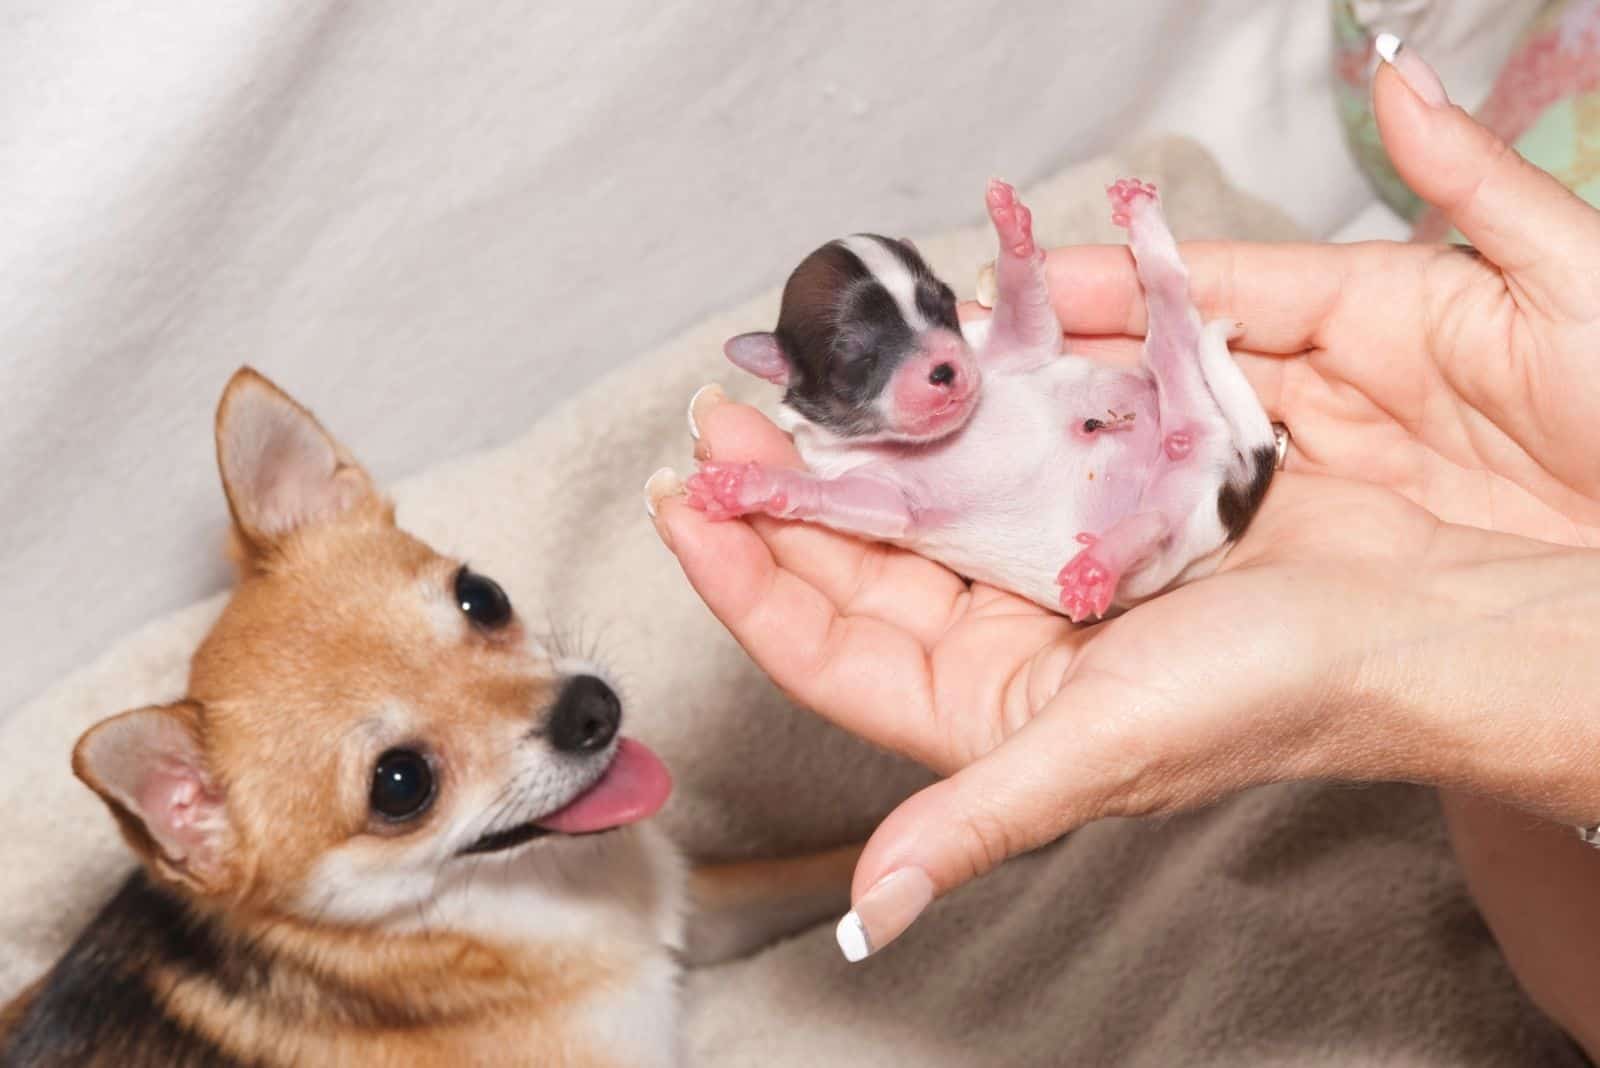 dog birth concept with the newborn pup on the hand of the woman